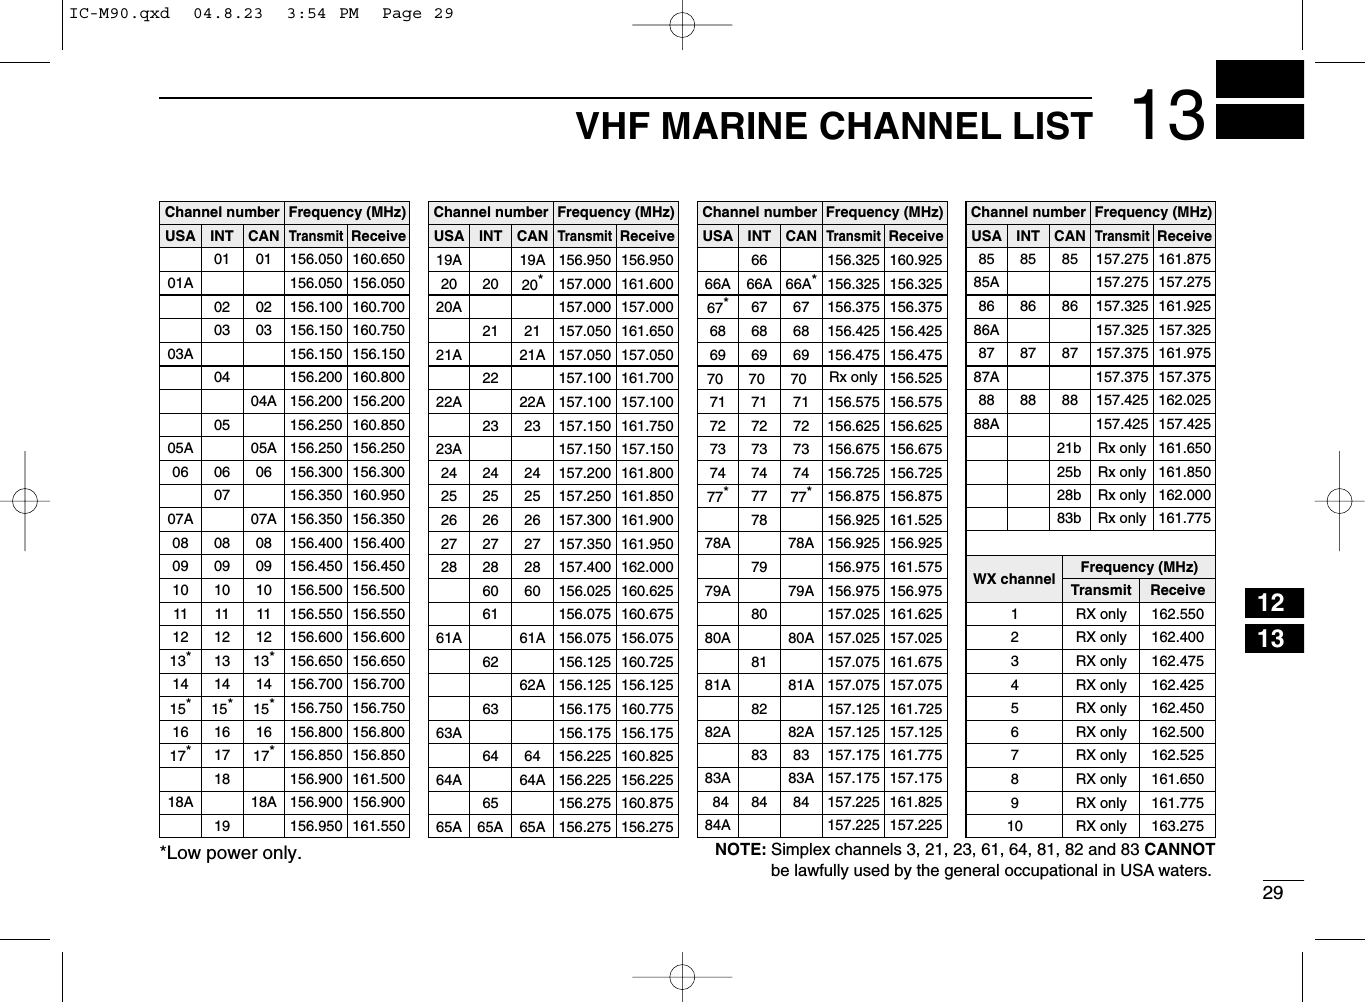 2913VHF MARINE CHANNEL LIST1213Channel numberUSA CANTransmitReceiveFrequency (MHz)INTChannel number Frequency (MHz)USA CANTransmitReceiveINTChannel number Frequency (MHz)USA CANTransmitReceiveINTChannel number Frequency (MHz)USA CANTransmitReceiveINTWX channel Frequency (MHz)Transmit Receive01 156.050 160.65001A 156.050 156.05002 156.100 160.70003 156.150 160.75003A 156.150 156.150156.200 160.80004A 156.200 156.200156.250 160.85005A 05A 156.250 156.25006 06 156.300 156.300156.350 160.95007A 07A 156.350 156.35008 08 156.400 156.40009 09 156.450 156.45010 10 156.500 156.50011 11 156.550 156.55012 12 156.600 156.60013*13*156.650 156.65014 14 156.700 156.70015*15*156.750 156.75016 16 156.800 156.80017*17*156.850 156.850156.900 161.50018A 18A 156.900 156.900010203040506070809101112131415*161718156.950 161.55019A 19A 156.950 156.95020 20*157.000 161.60021 157.050 161.65021A 21A 157.050 157.050157.100 161.70022A 22A 157.100 157.10023 157.150 161.75023A 157.150 157.15024 24 157.200 161.80025 25 157.250 161.85026 26 157.300 161.90027 27 157.350 161.95028 28 157.400 162.00060 156.025 160.625156.075 160.67561A 61A 156.075 156.075156.125 160.72562A 156.125 156.125156.175 160.77563A 156.175 156.17564 156.225 160.82564A 64A 156.225 156.22519202122232425262728606162636420A 157.000 157.00066A 66A*156.325 160.92567*67 156.375 156.37568 68 156.425 156.42569 69 156.475 156.47570 70 156.52571 71 156.575 156.57572 72 156.625 156.62573 73 156.675 156.67574 74 156.725 156.72577*77*156.875 156.875156.925 161.52578A 78A 156.925 156.925156.975 161.57579A 79A 156.975 156.975157.025 161.62580A 80A 157.025 157.025157.075 161.67581A 81A 157.075 157.075157.125 161.72582A 82A 157.125 157.125666768697071727374777879808182156.325 156.32566A85 85 157.275 161.87585A 157.275 157.27586 86 157.325 161.92586A 157.325 157.32587 87 157.375 161.97587A 157.375 157.37588 88 157.425 162.02588A 157.425 157.4258586878821b Rx onlyRx only161.65025b Rx only 161.85028b Rx only 162.00083b Rx only 161.77541 RX only 162.5502 RX only 162.4003 RX only 162.4755 RX only 162.4506 RX only 162.5007 RX only 162.5258 RX only 161.6509 RX only 161.77510 RX only 163.275RX only 162.425156.275 160.87565A 65A 156.275 156.2756565A 84A83 157.175 161.77583A 83A 157.175 157.17584 84 157.225 161.8258384157.225 157.225*Low power only.NOTE: Simplex channels 3, 21, 23, 61, 64, 81, 82 and 83 CANNOTbe lawfully used by the general occupational in USA waters.IC-M90.qxd  04.8.23  3:54 PM  Page 29